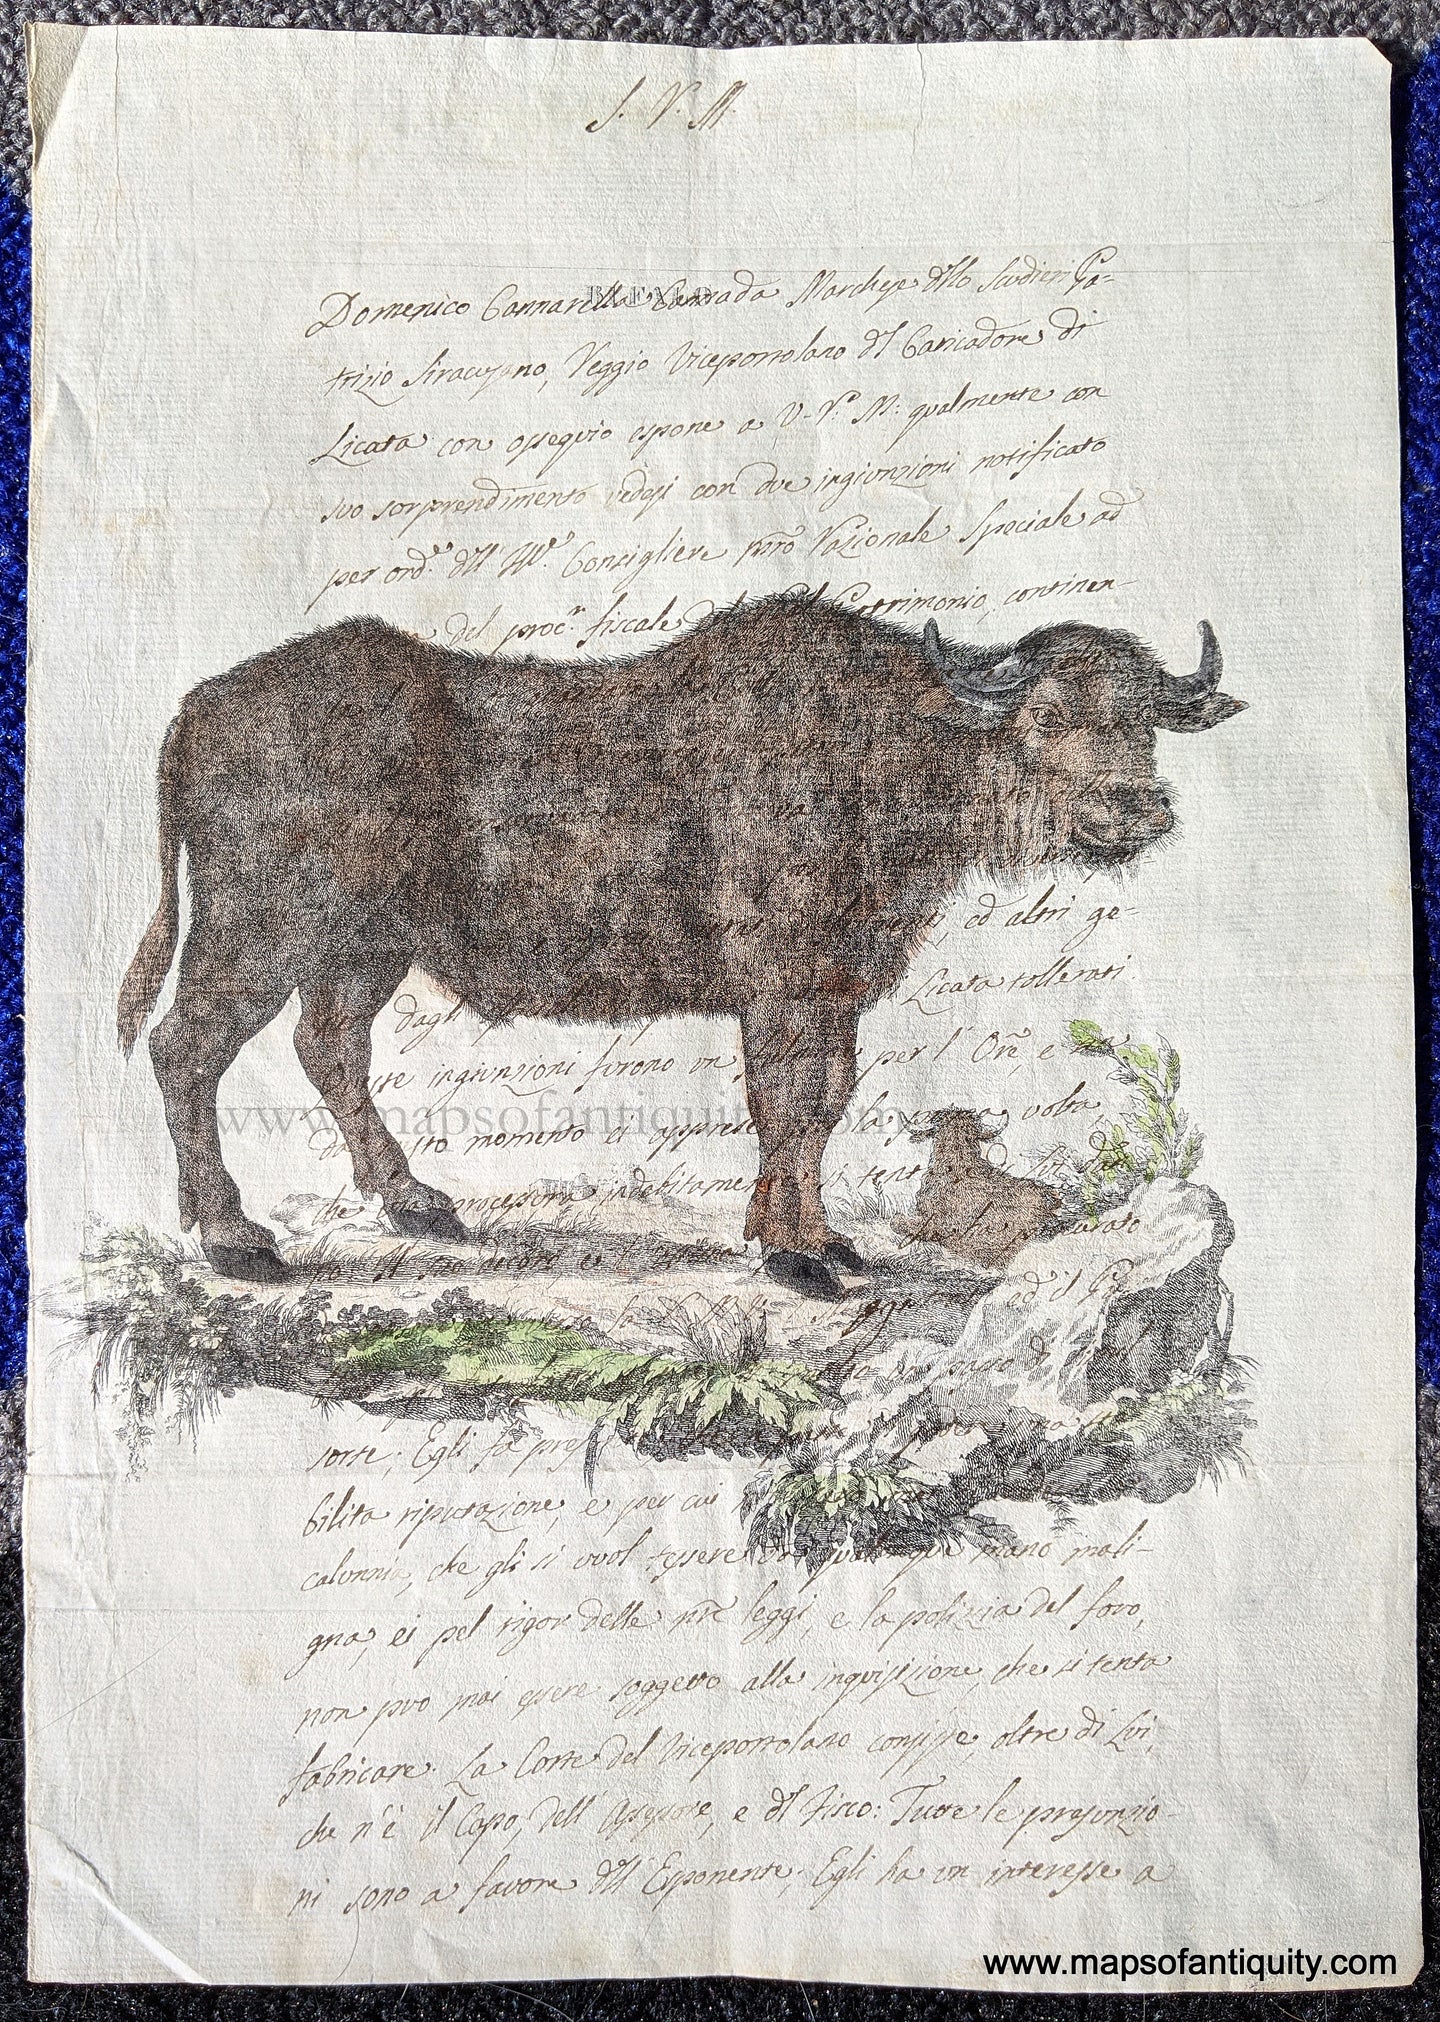 Digitally-Engraved-Specialty-Reproduction-Natural-History-Print-Prints-Water-Buffalo-Reproductions-1800s-19th-century-Maps-of-Antiquity